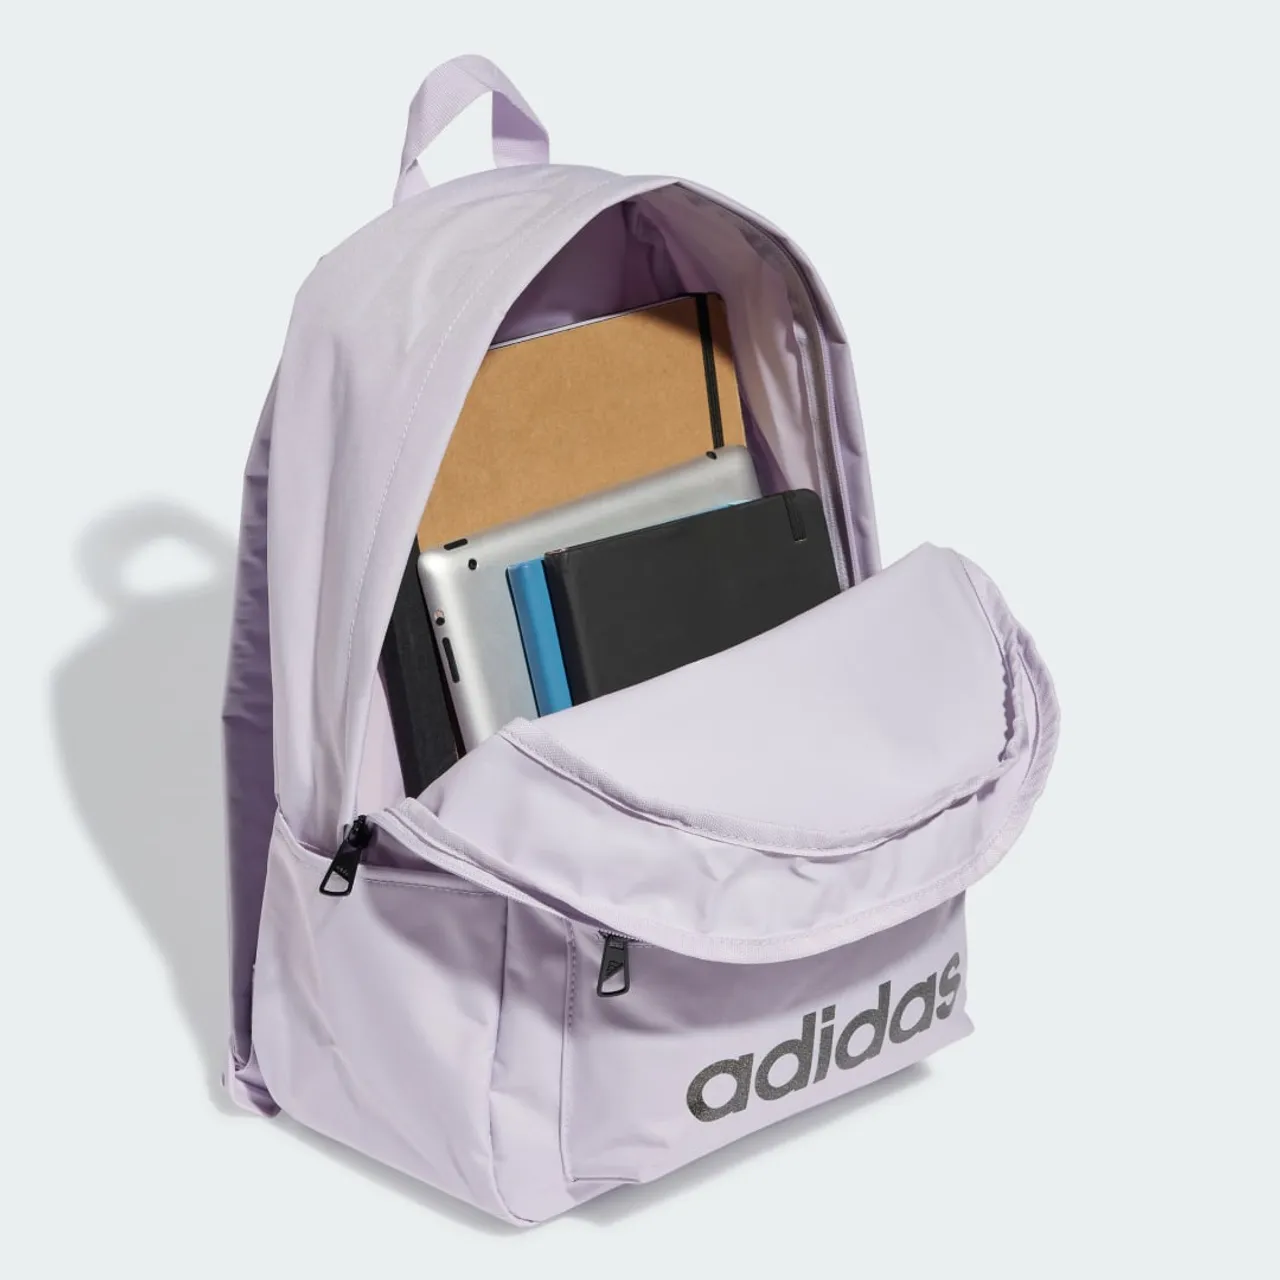 Linear Essentials Backpack